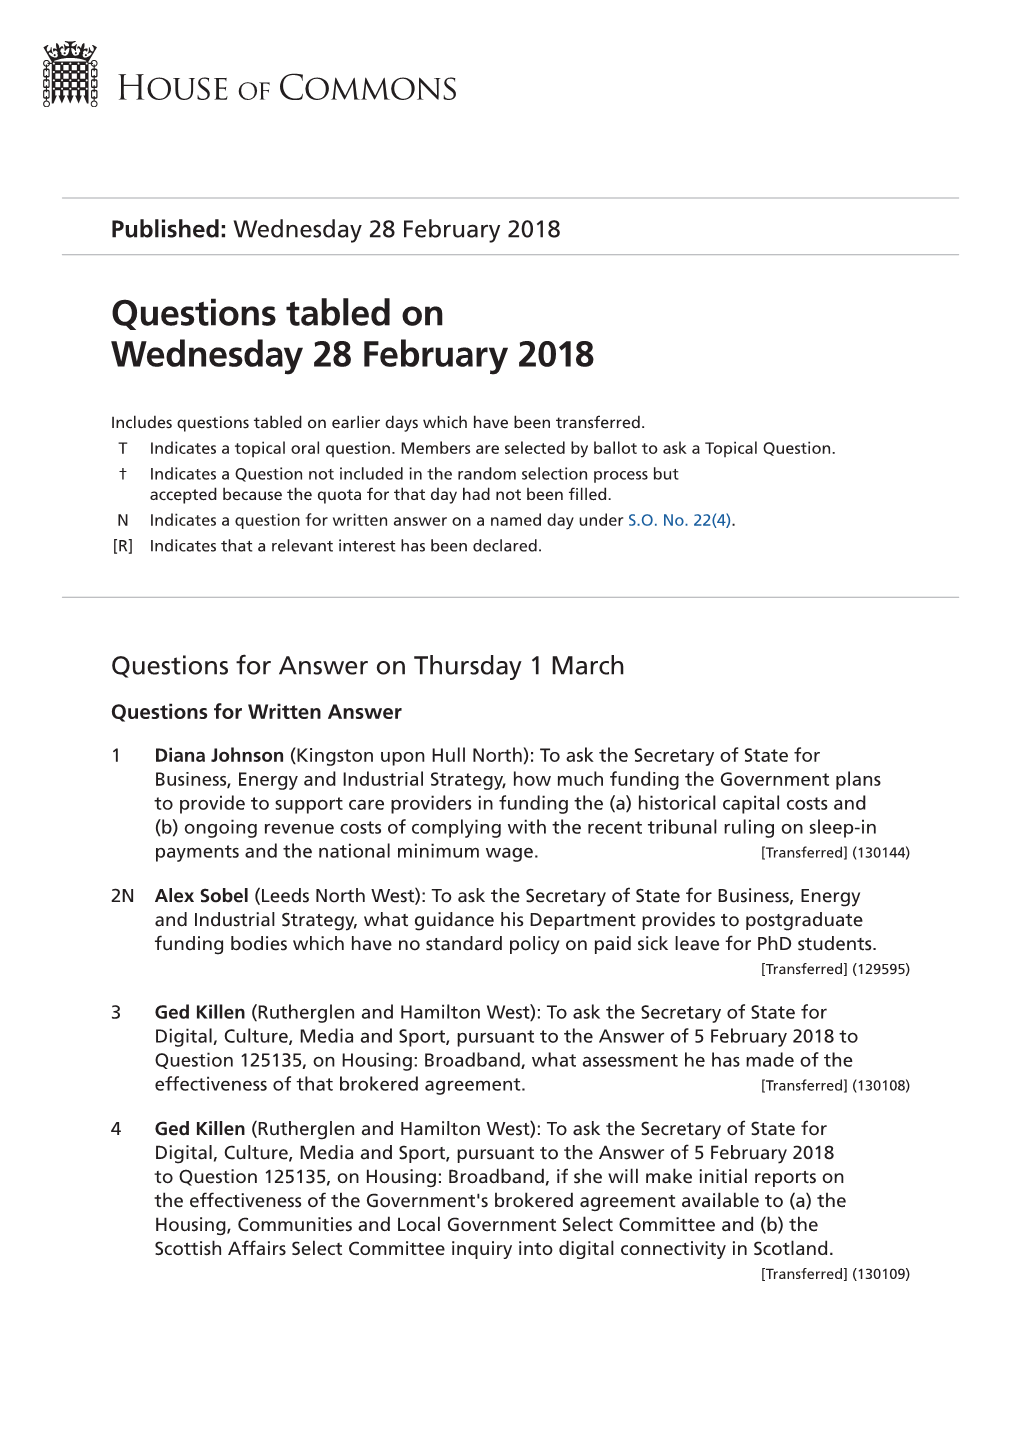 Questions Tabled on Wed 28 Feb 2018